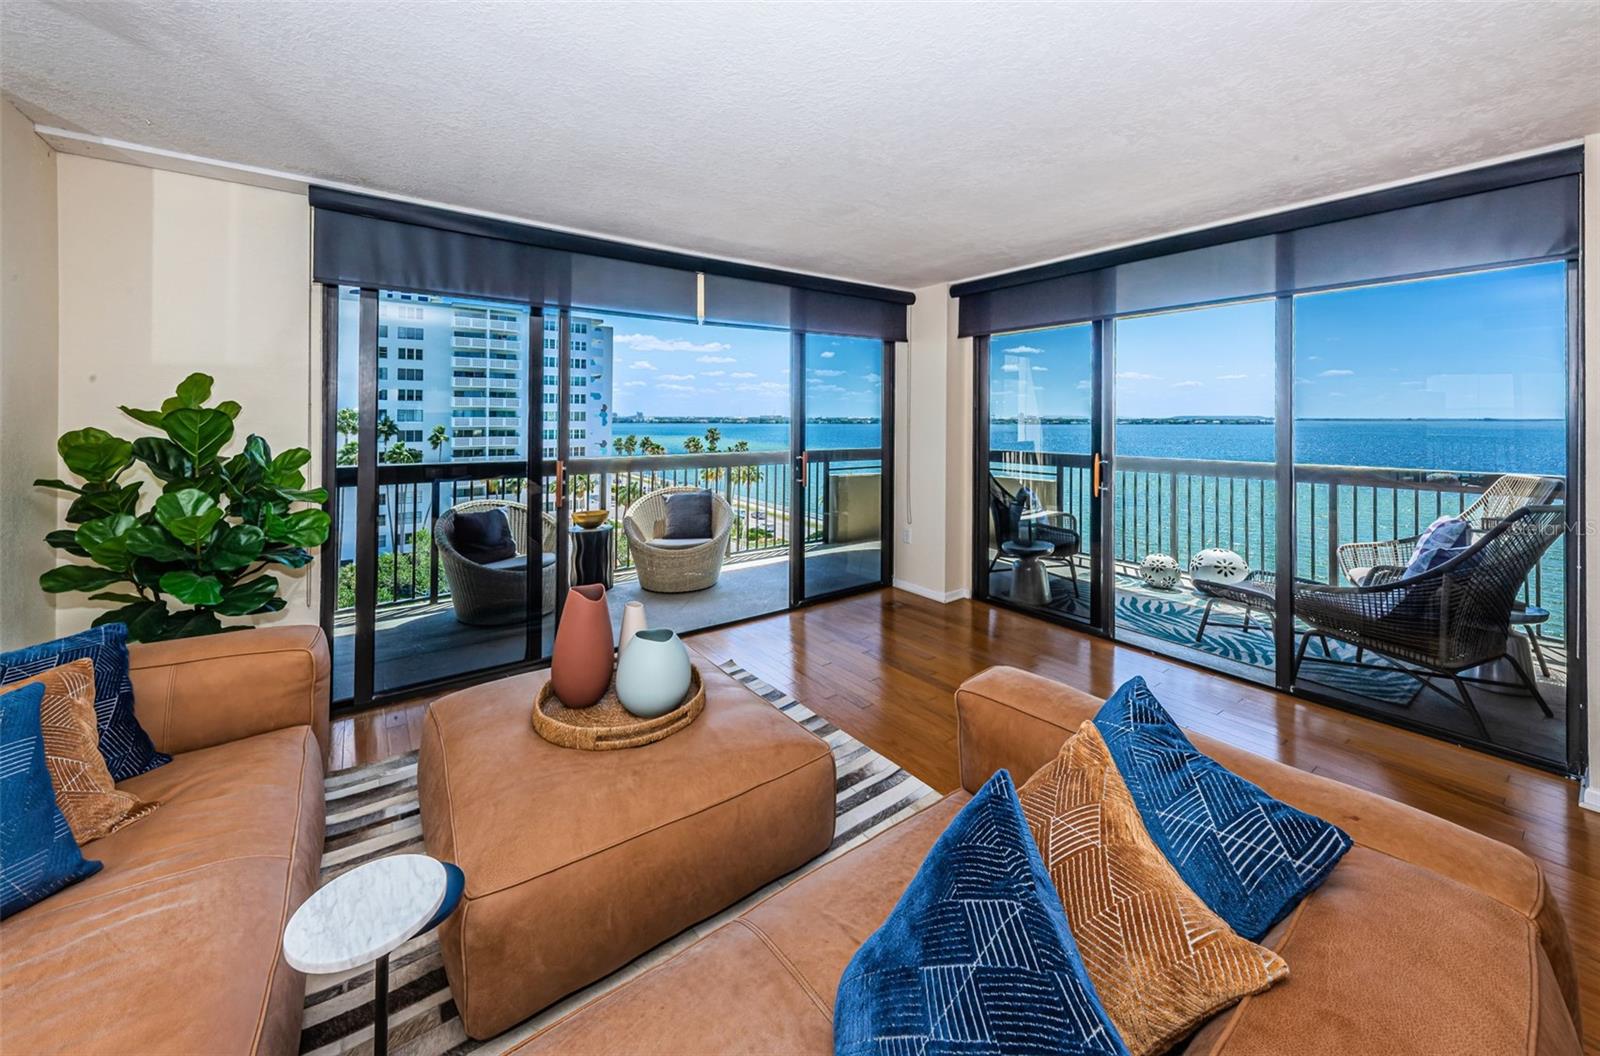 Floor to ceiling sliding glass doors lead to bay view balcony with spectacular sunrises.